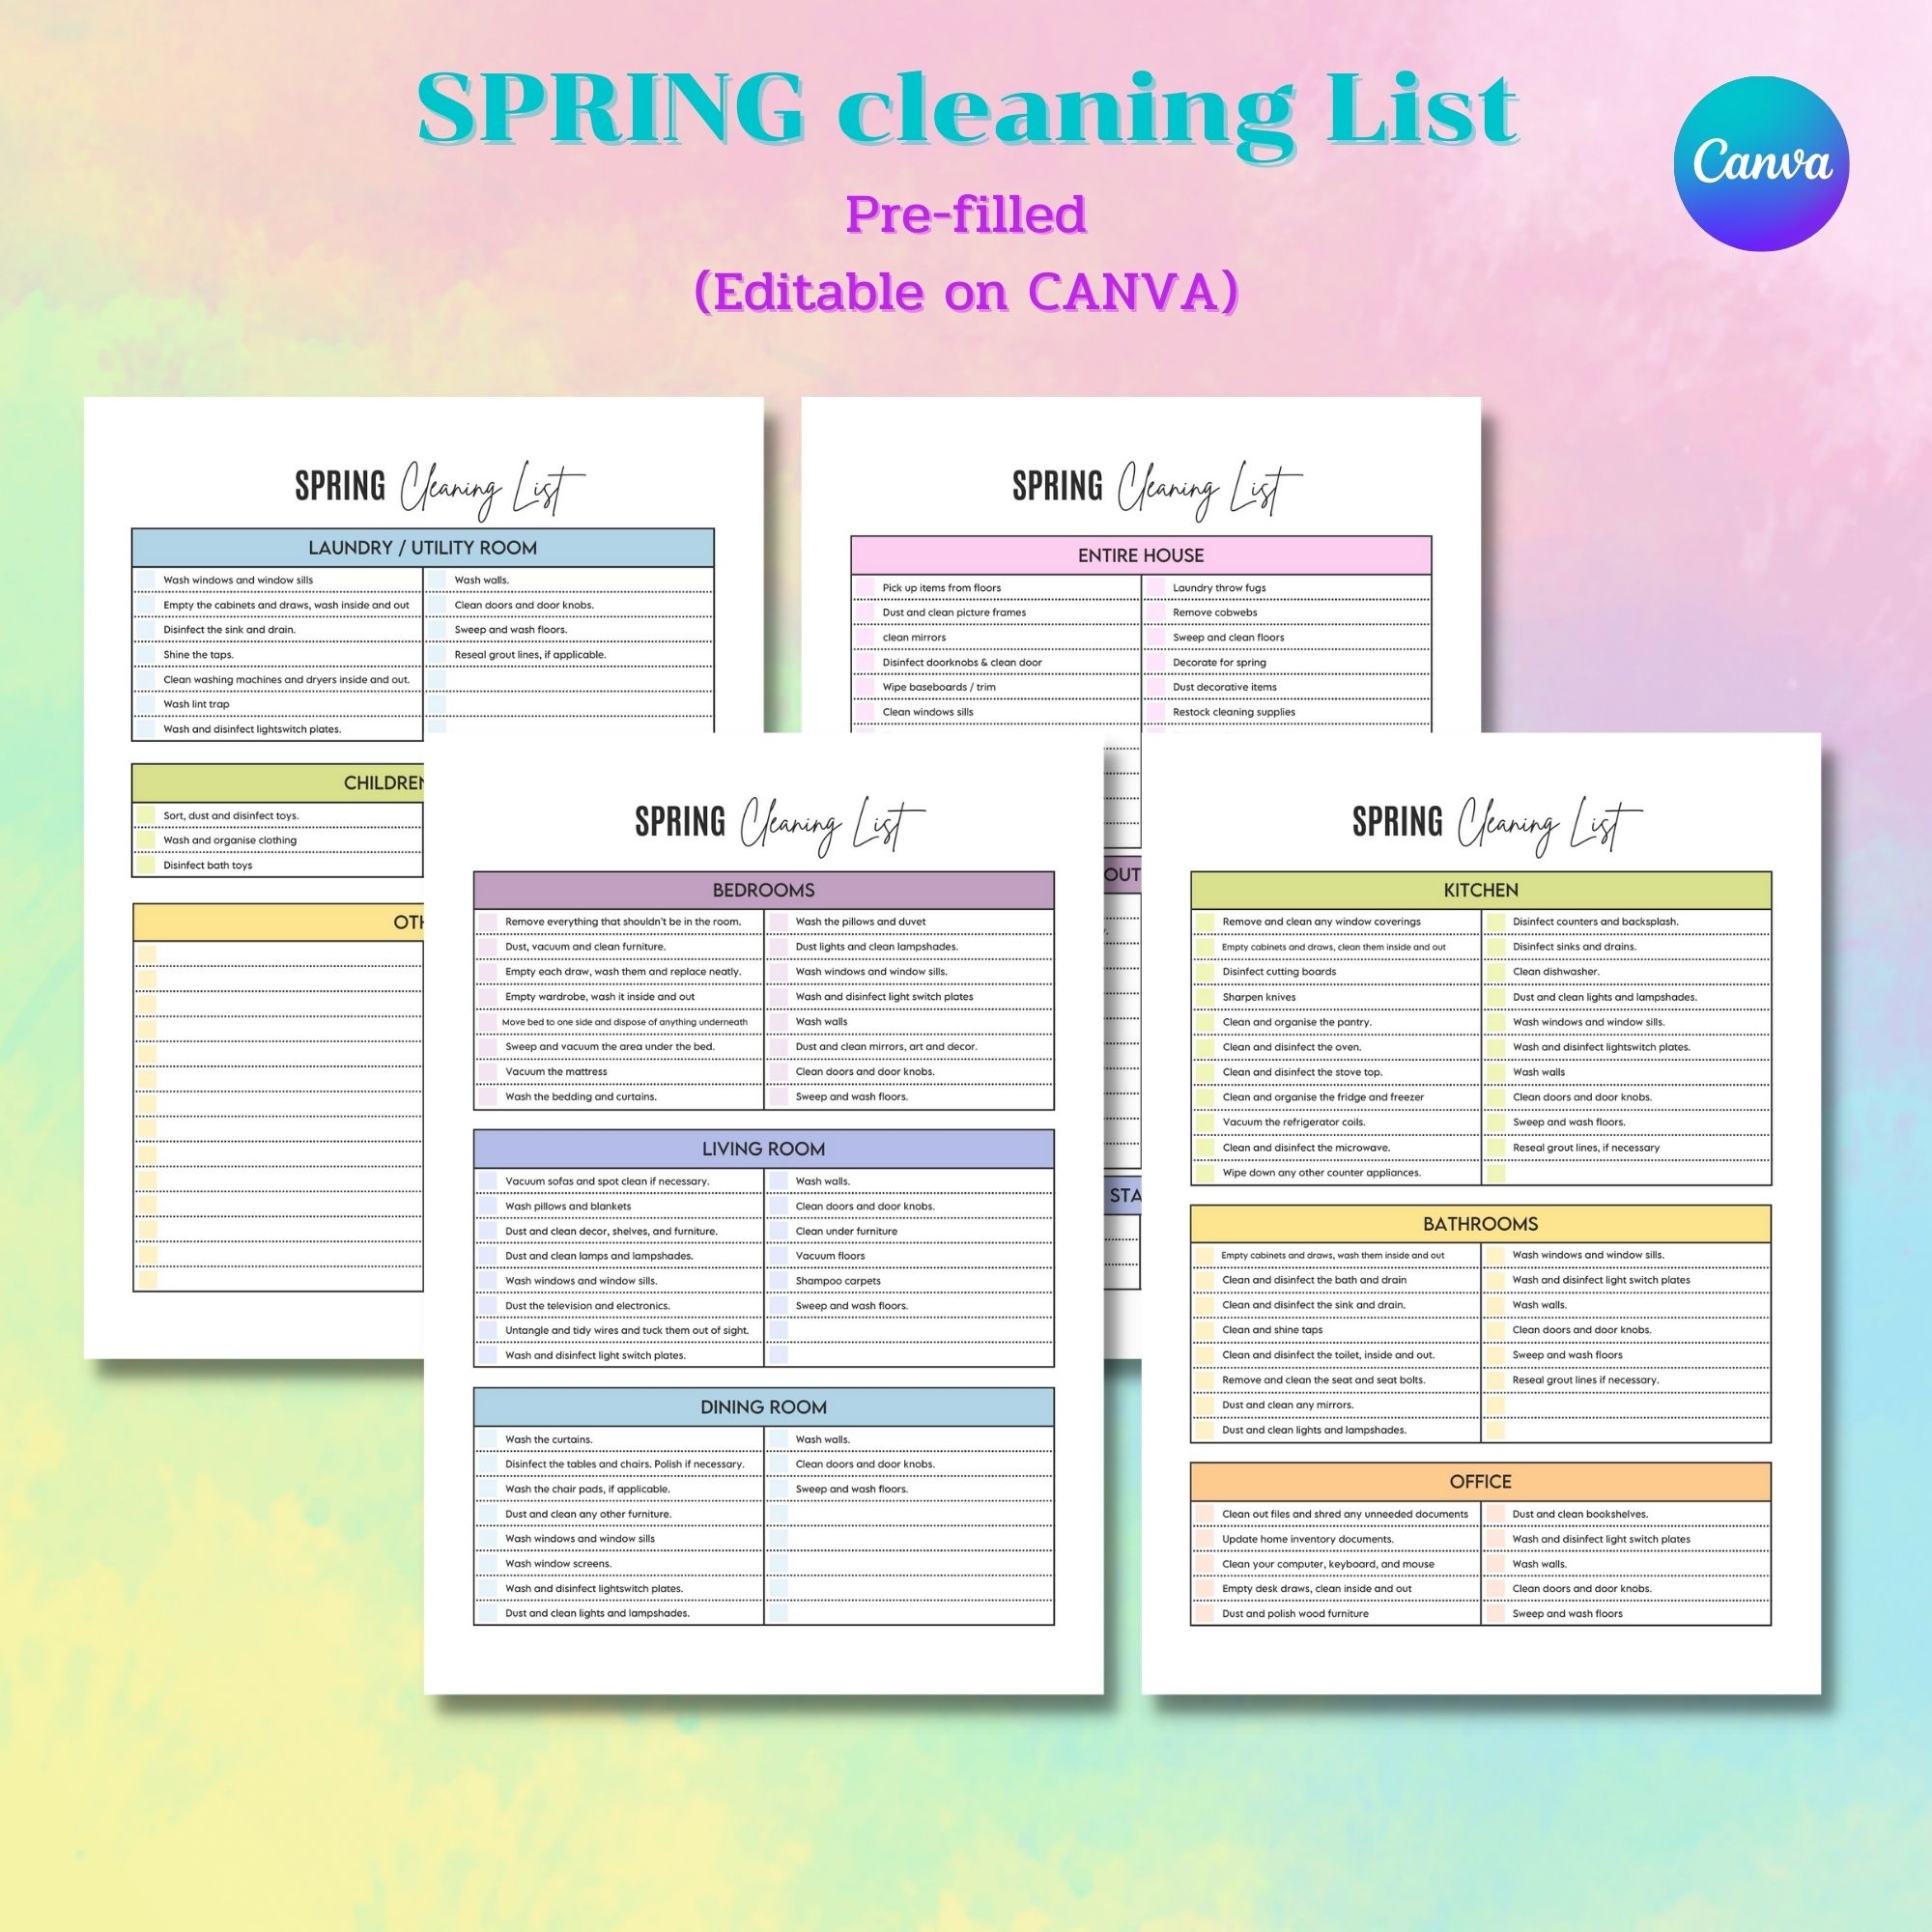 Spring cleaning list with the title spring cleaning list.